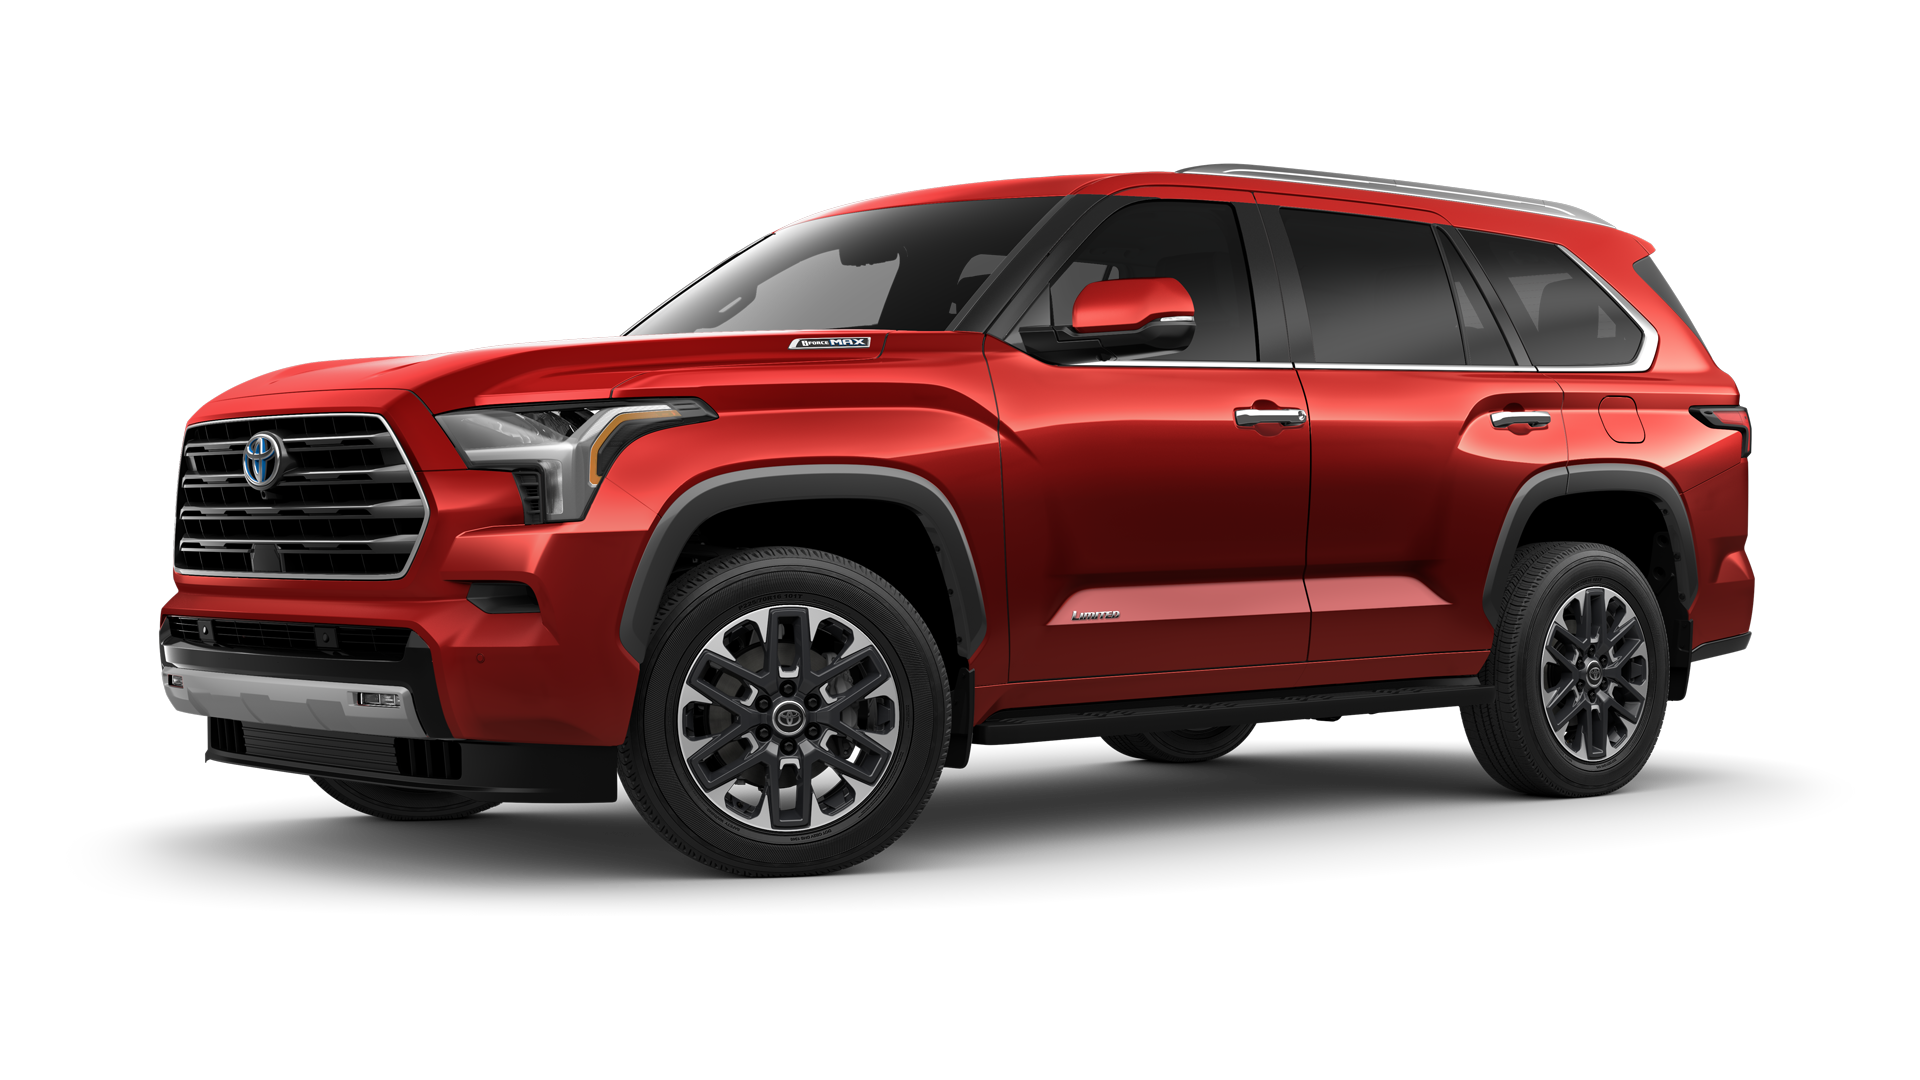 2023 Toyota Sequoia in Supersonic Red*.